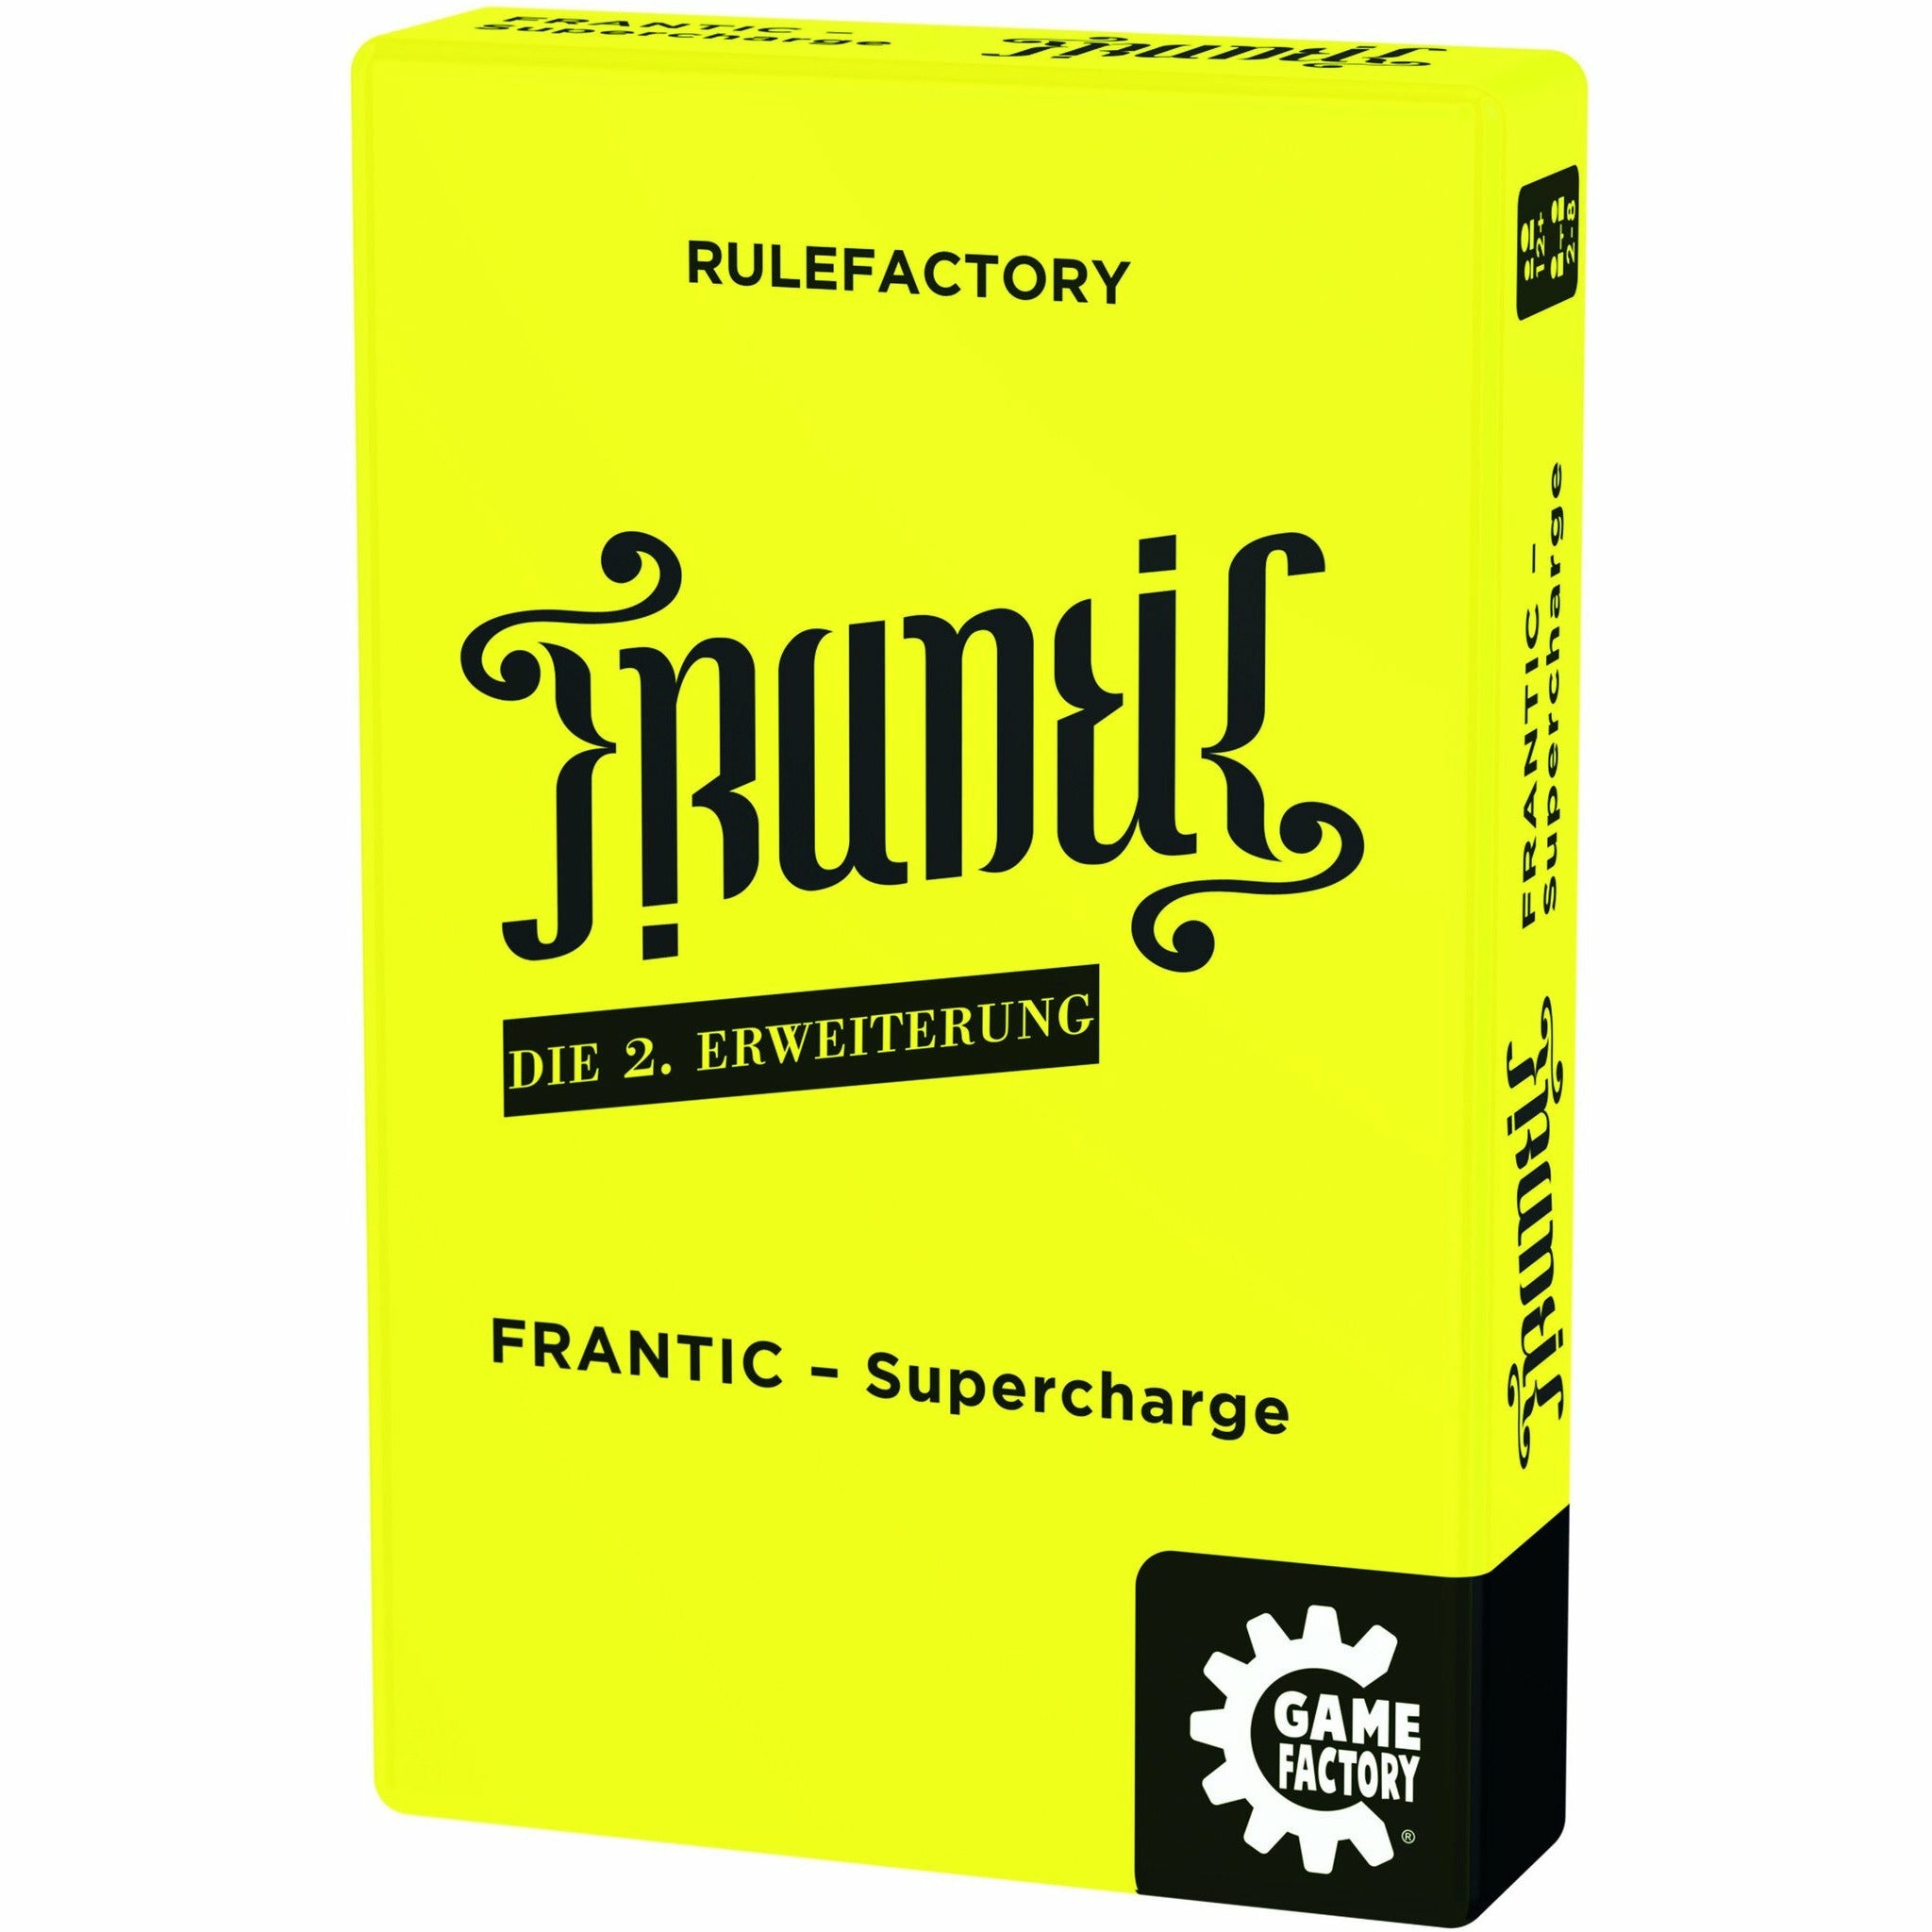 FRANTIC - Supercharge (d) | Carletto | GAMEFACTORY- 2. Erweiterung